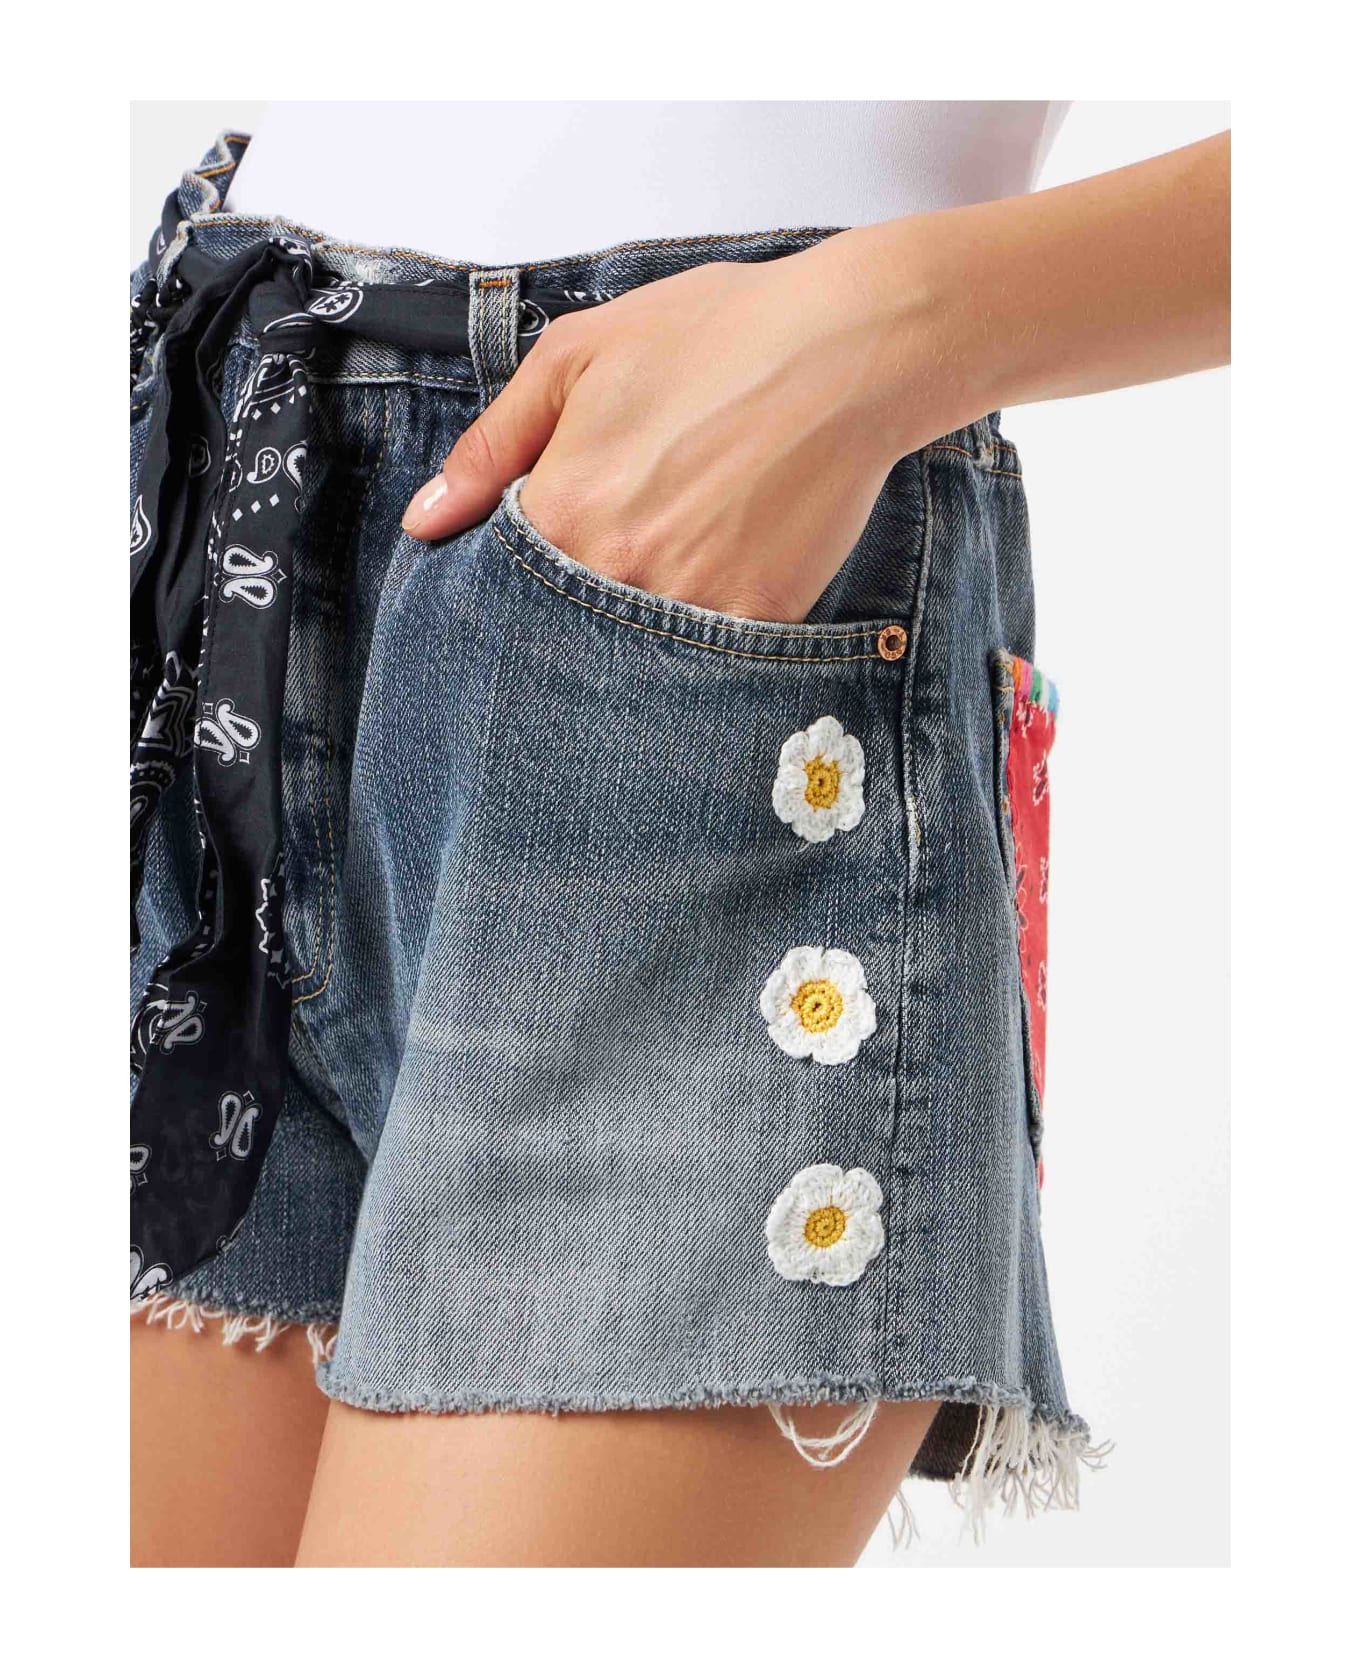 MC2 Saint Barth Woman Upcycled Denim Shorts With Embroidery - RED